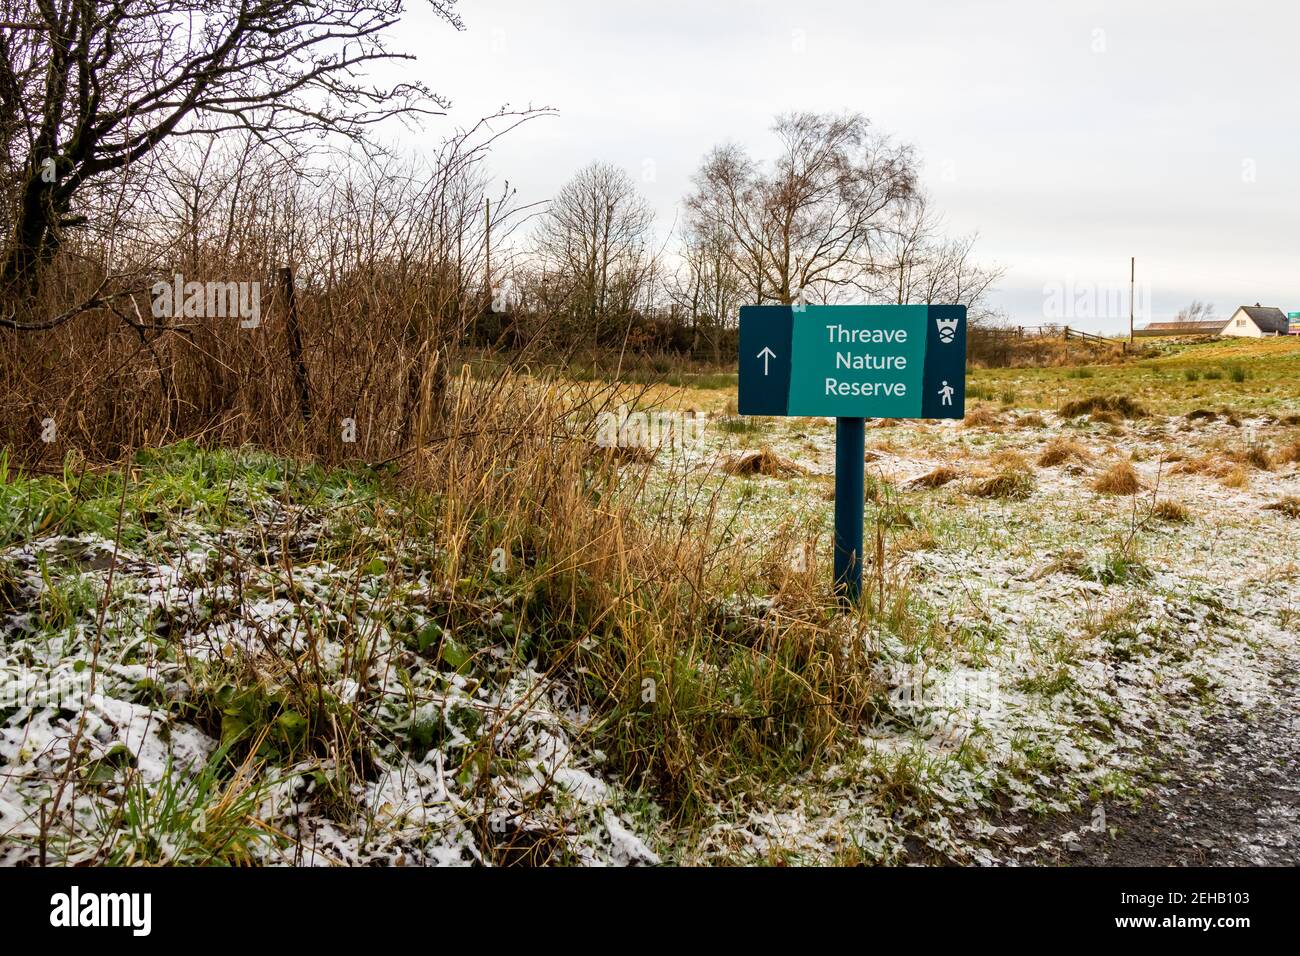 Castle Douglas, Schottland - 27th. Dezember 2020: National Trust for Scotland, Welcome to Threave Nature Reserve Schild bei Threave Estate, Castle Douglas, Stockfoto